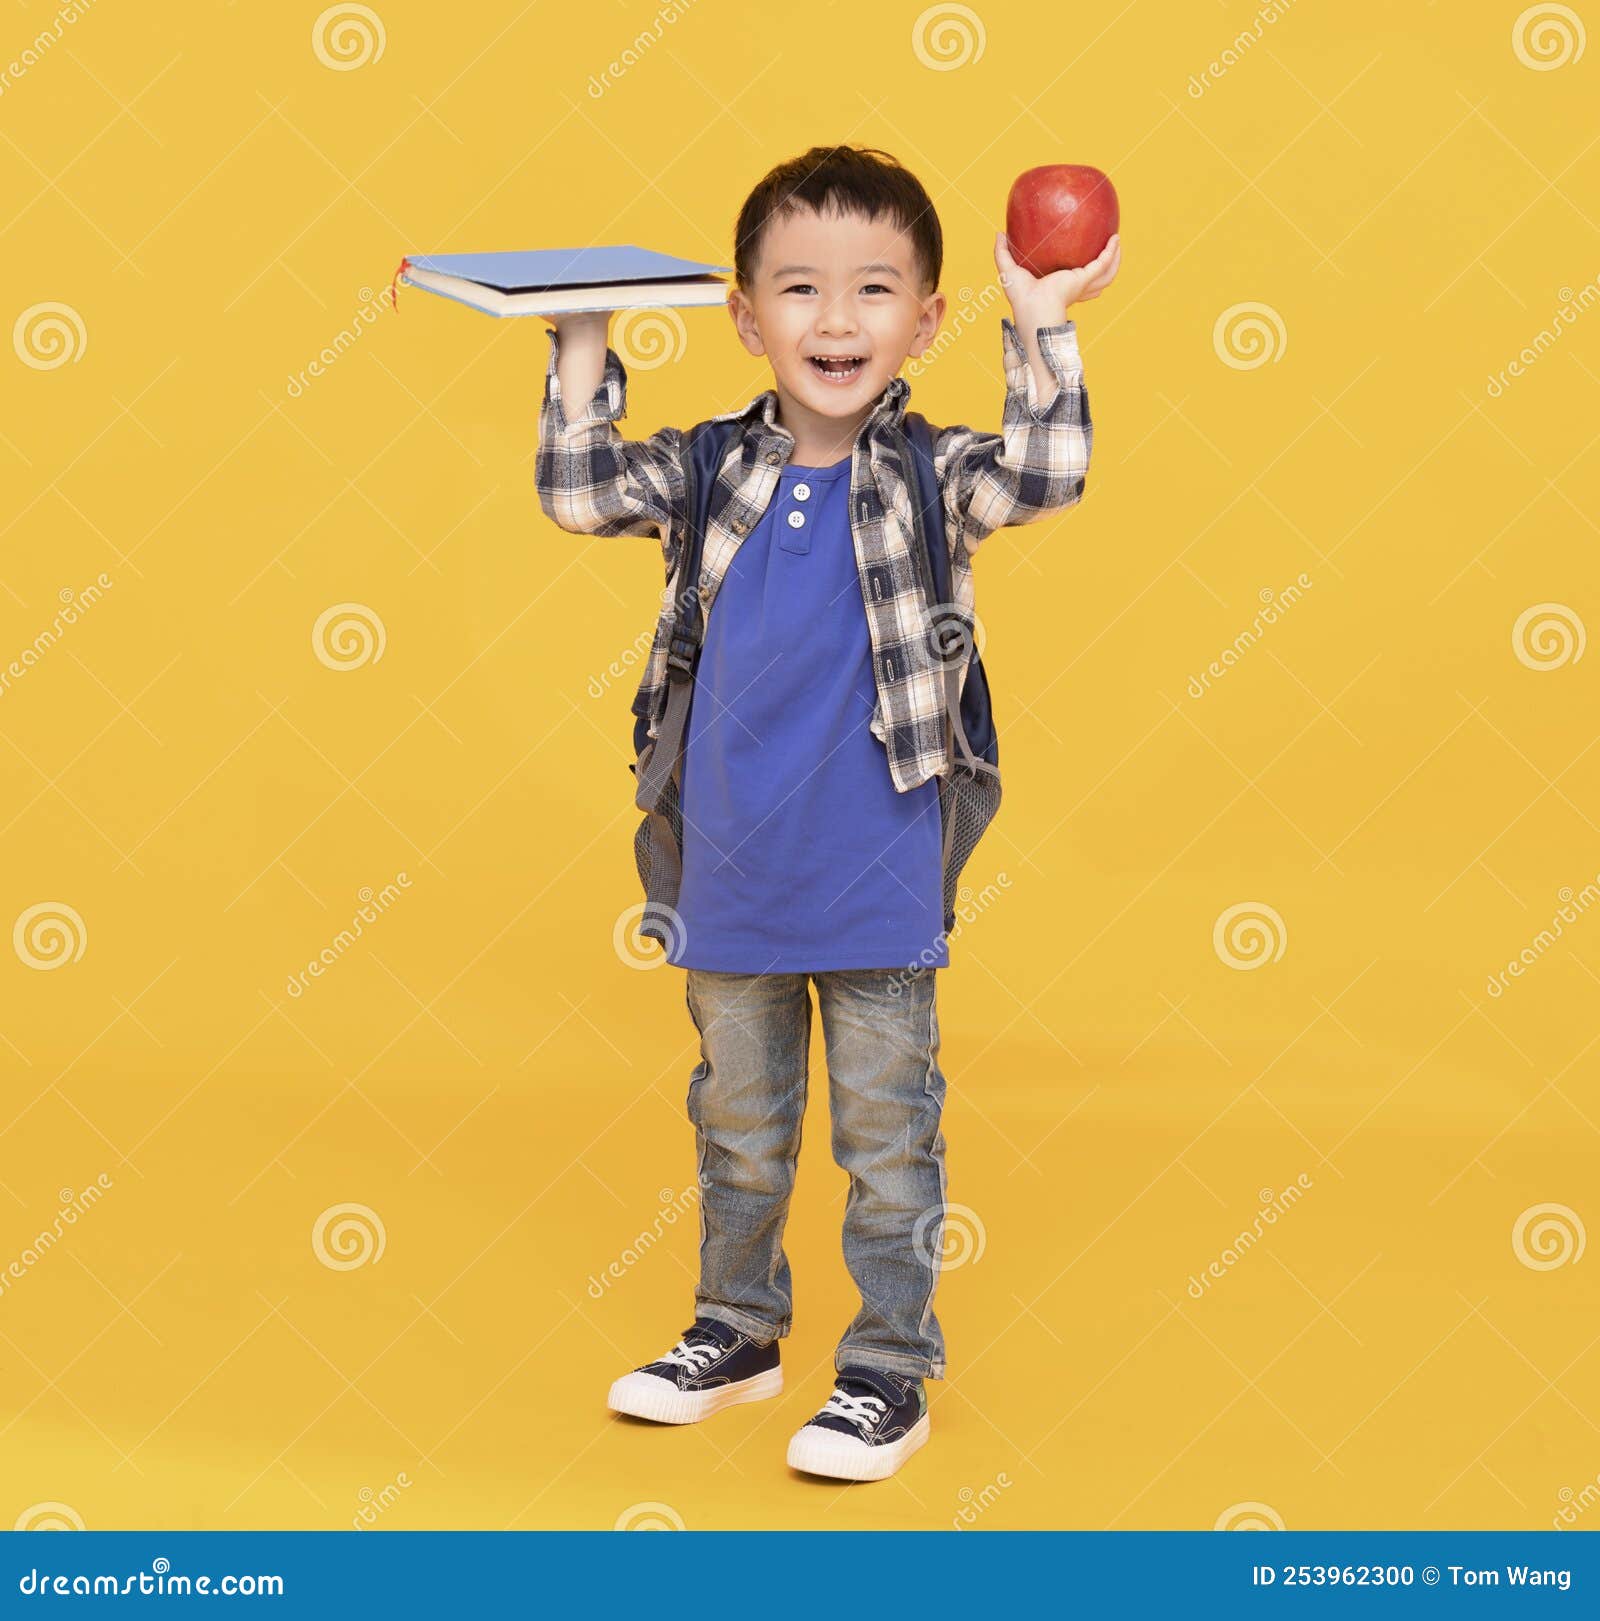 school boy with bagpack hold apple and book  on yellow